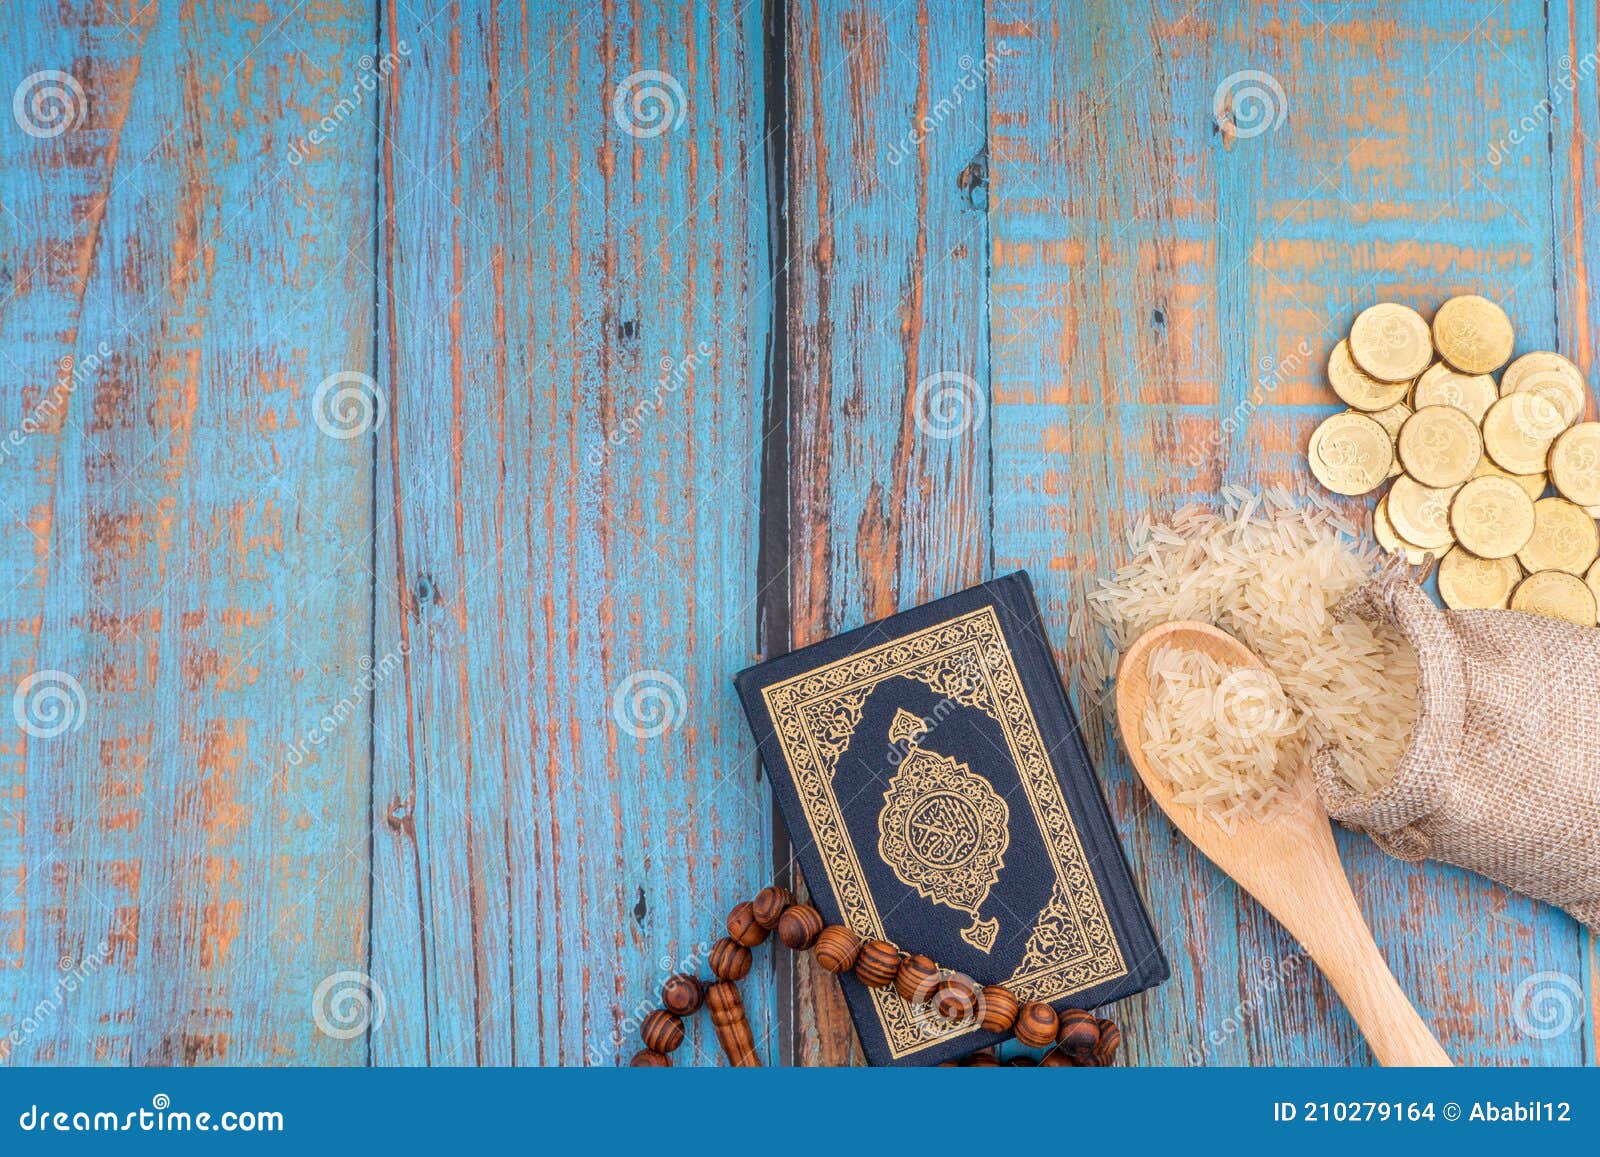 holy quran with arabic calligraphies translation meaning of al-quran, coins, rosary and rice. zakat concept.